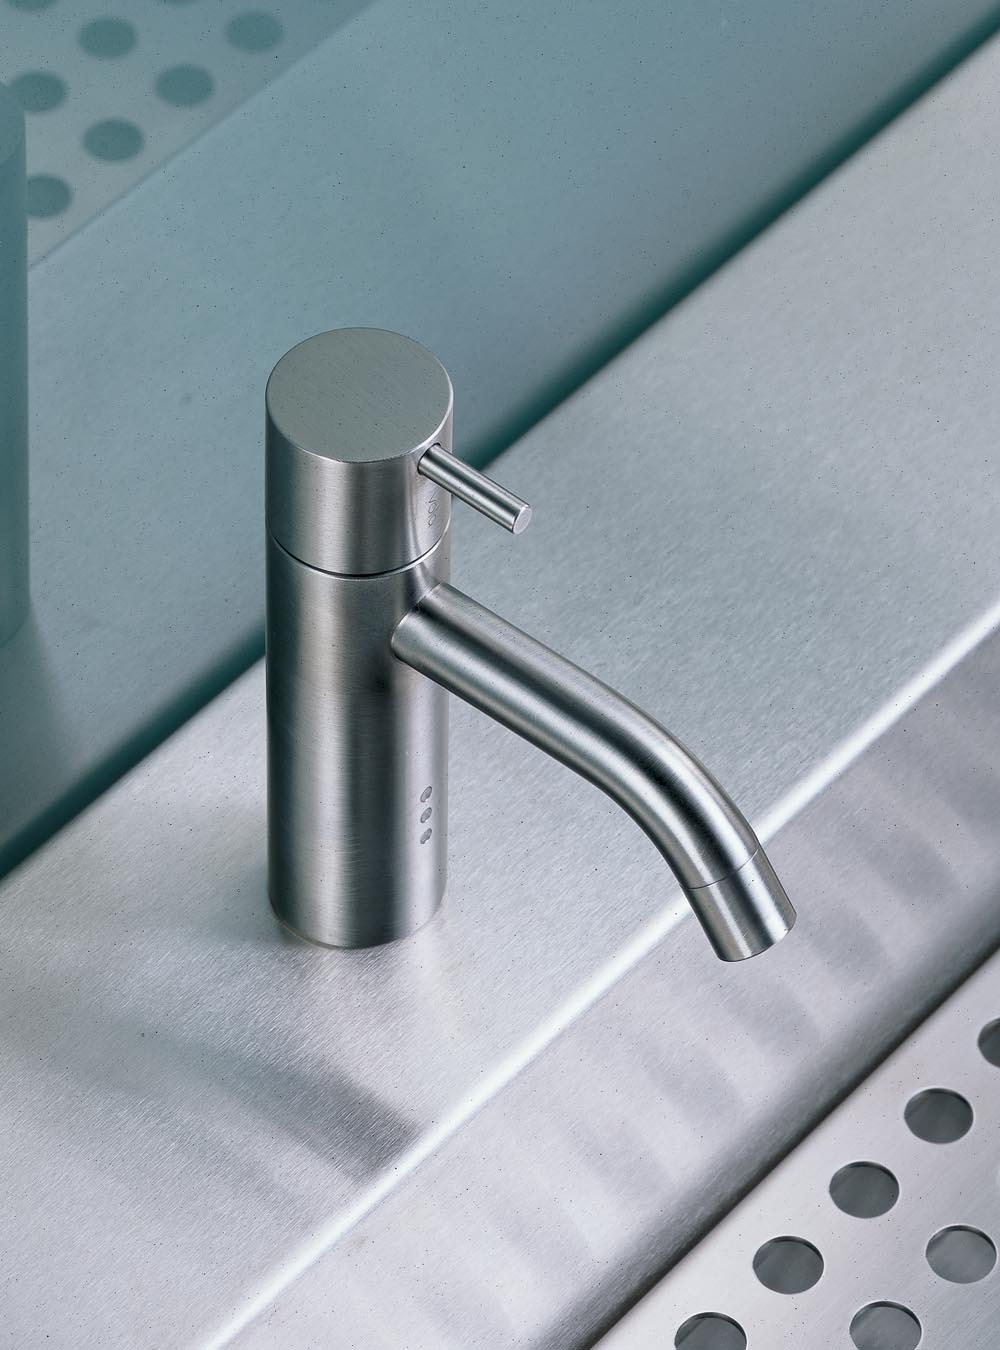 HV1EN2: Washbasin mixer with on-off sensor for ‘hands free’ operation, with peg on temperature control ha...